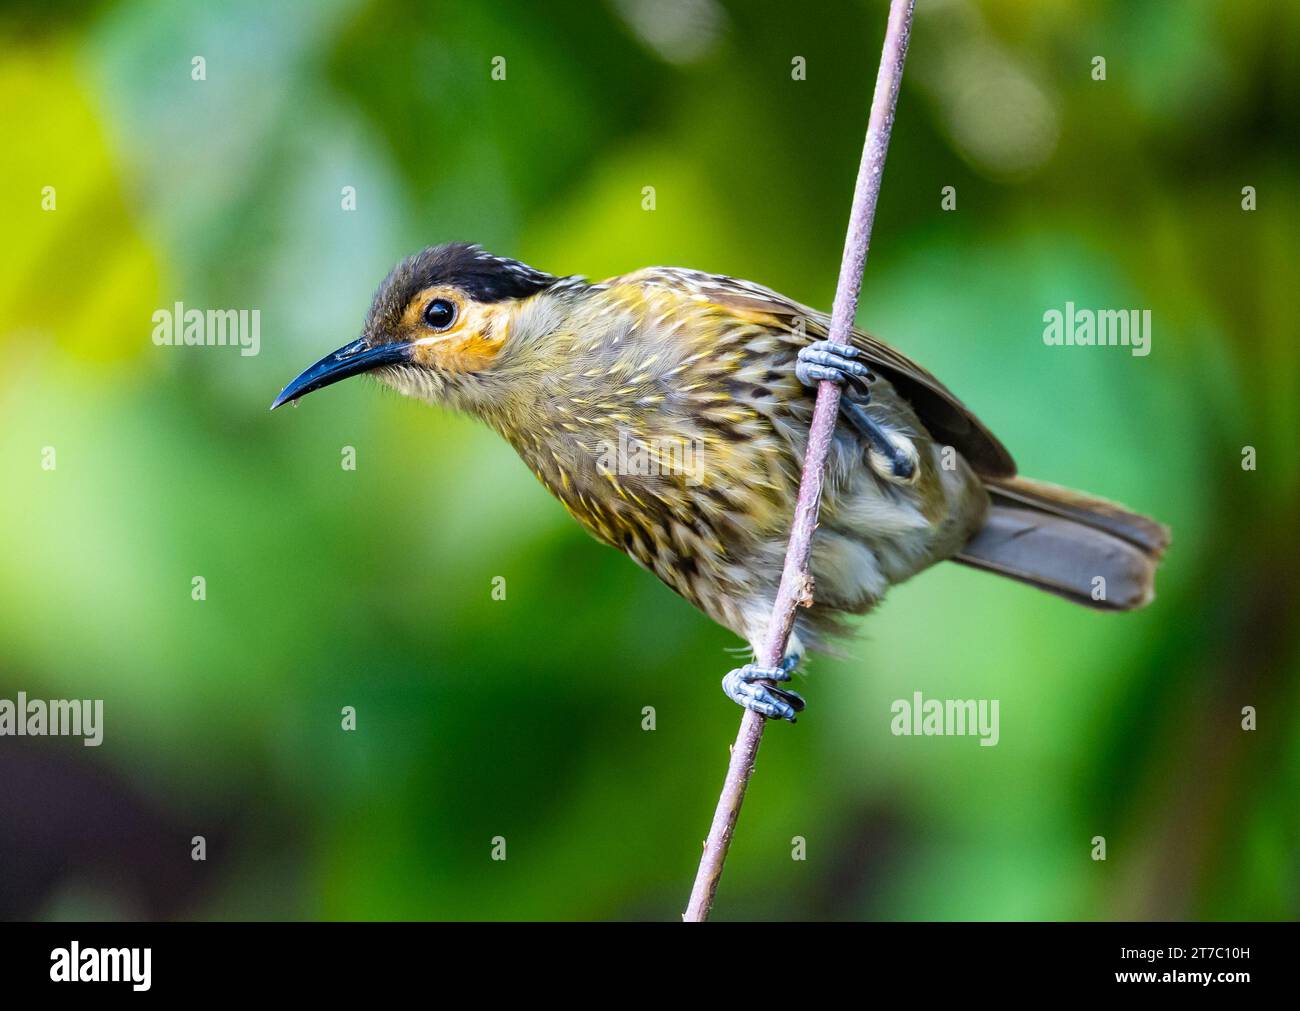 A Macleay's Honeyeater (Xanthotis macleayanus) perched on a stick. Queensland, Australia. Stock Photo